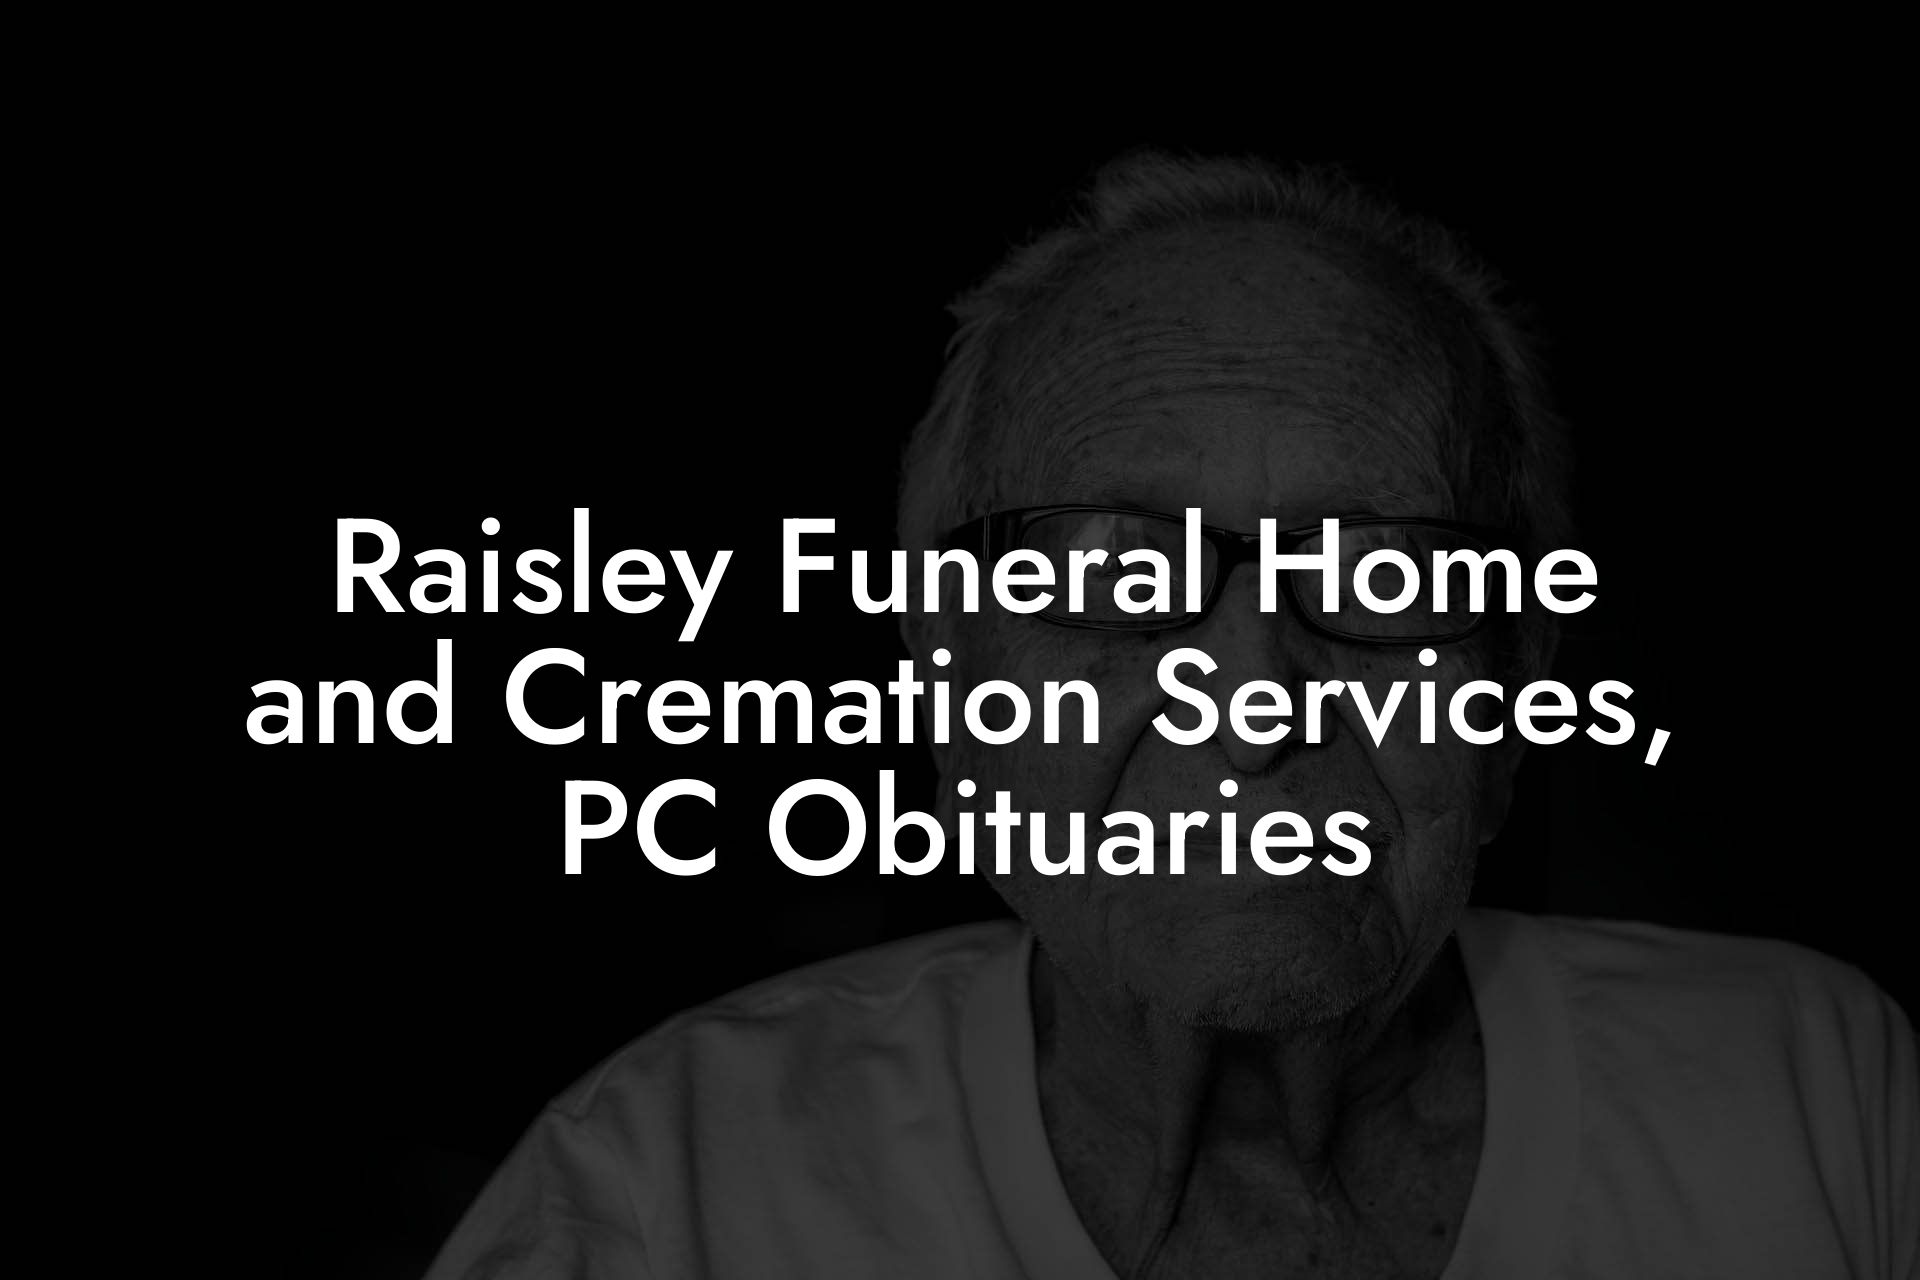 Raisley Funeral Home and Cremation Services, PC Obituaries